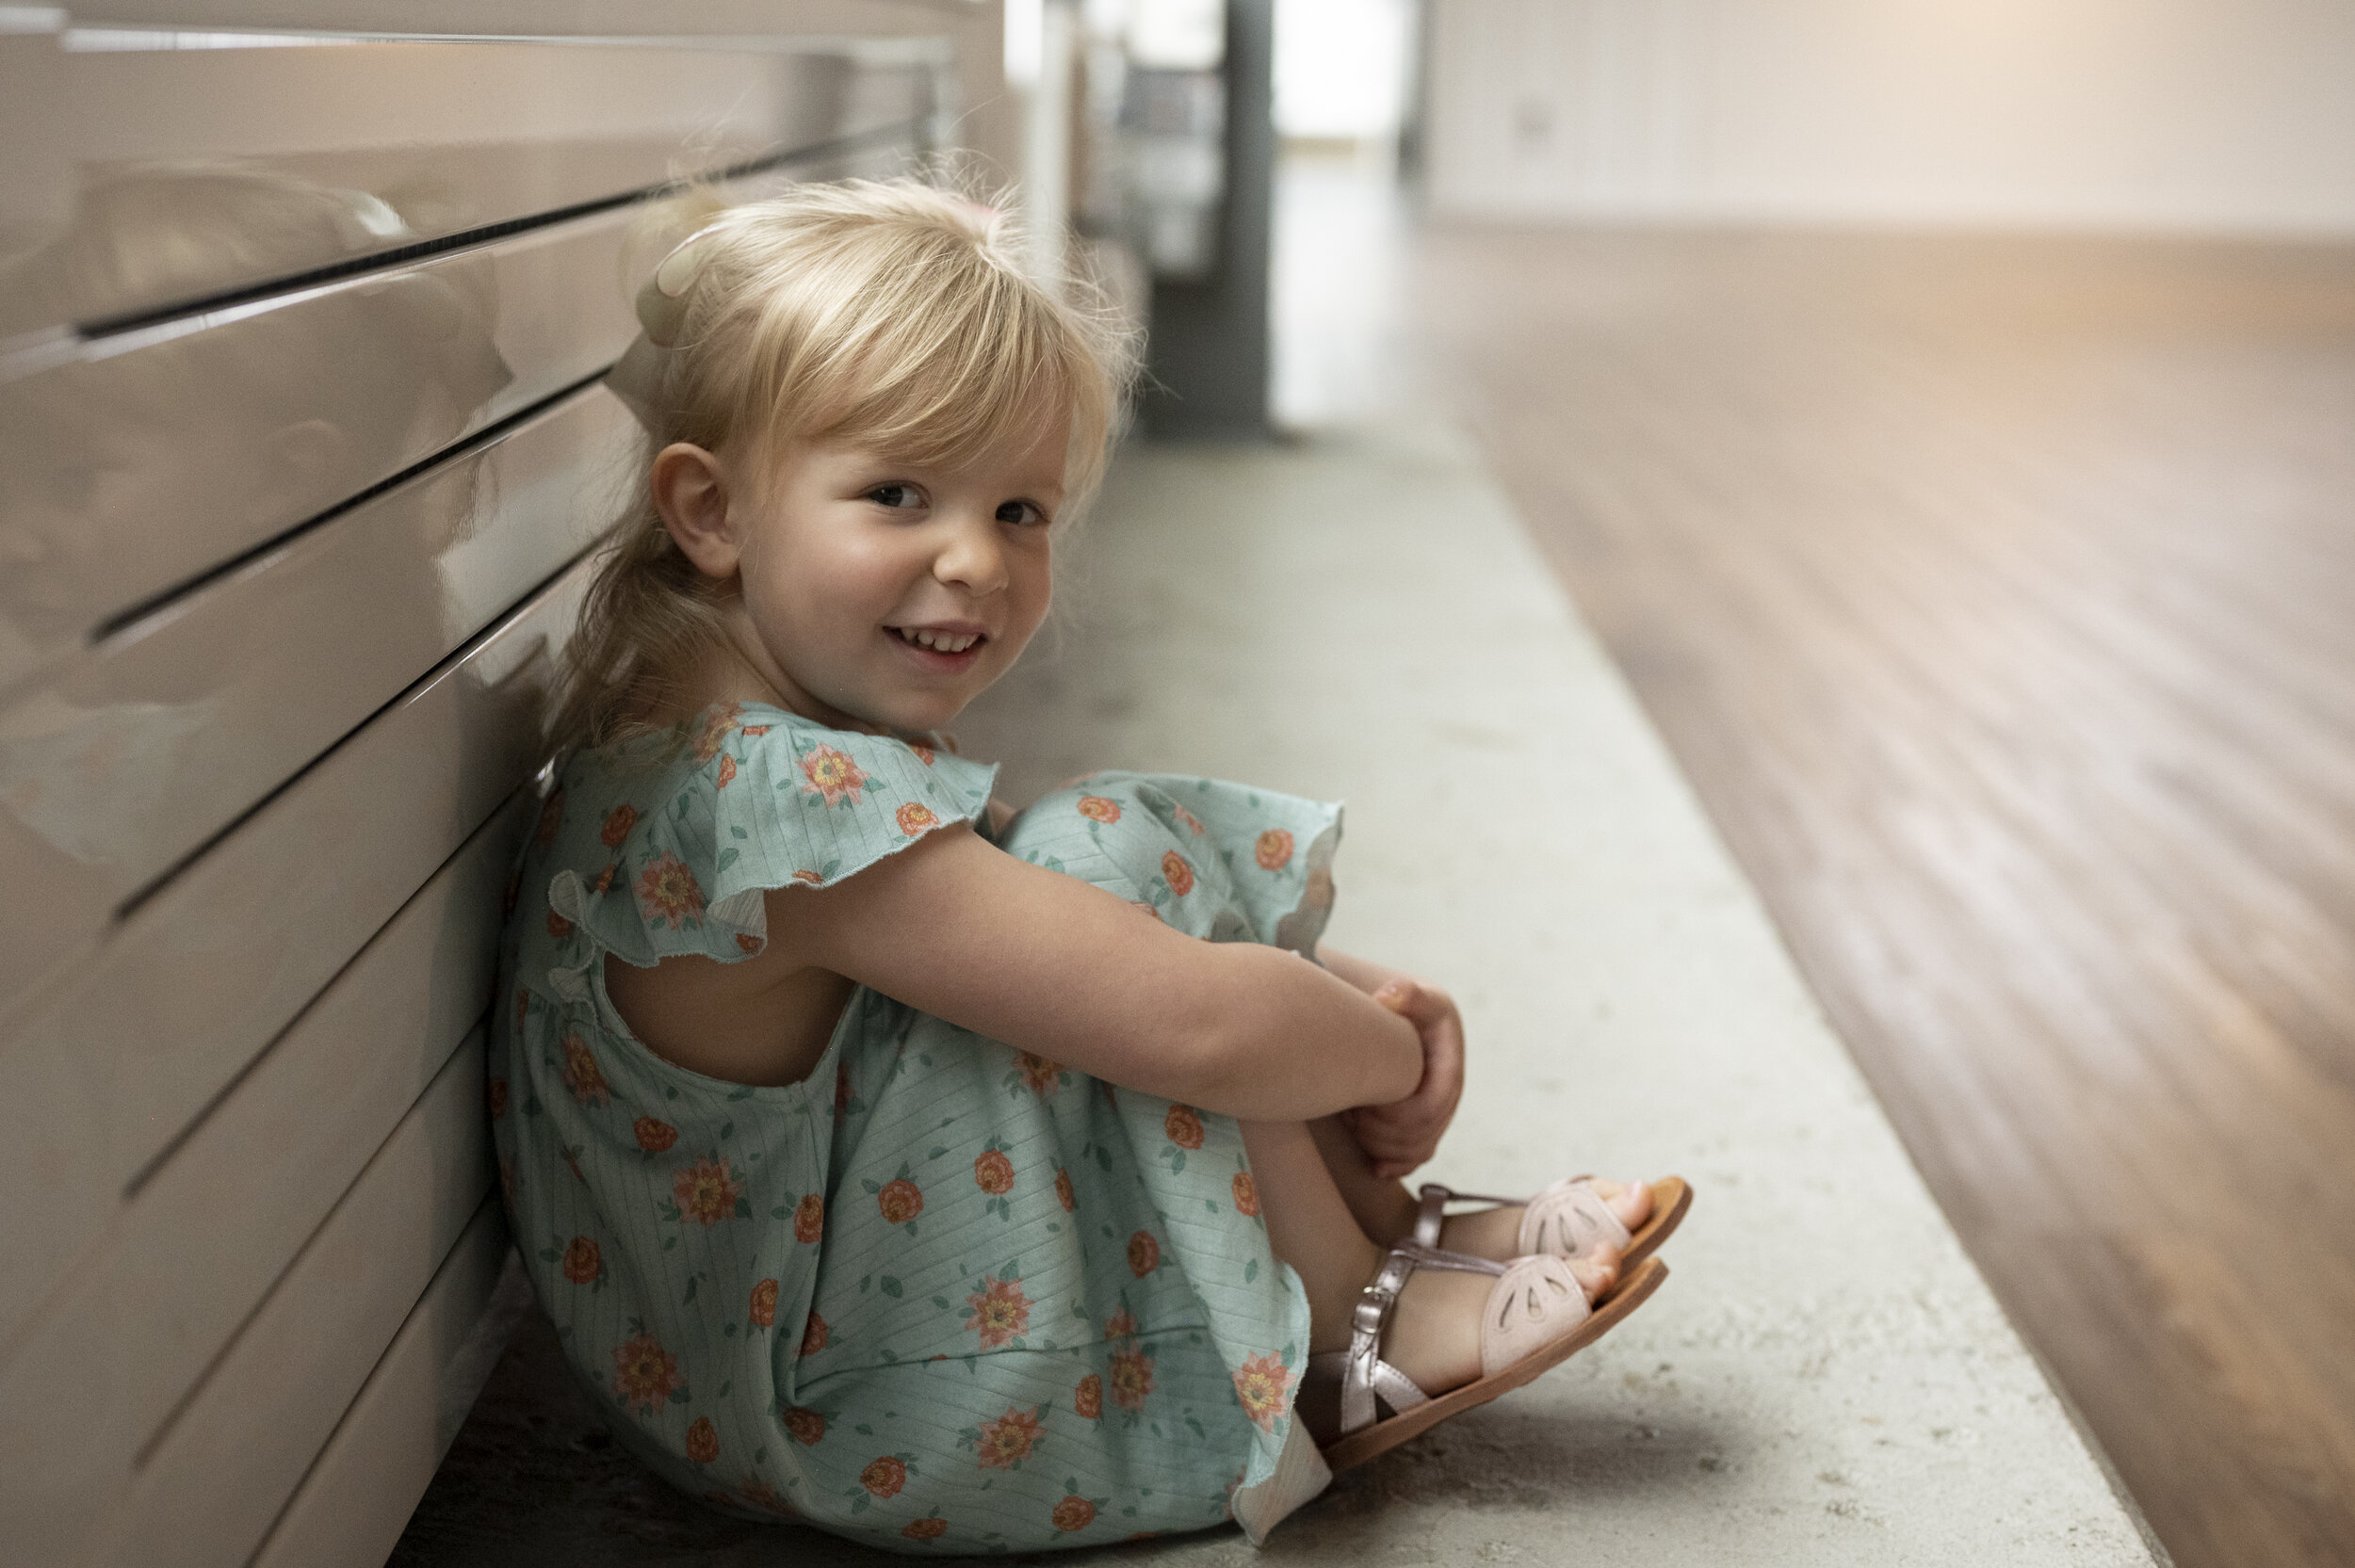 Documentary style photo of a young blond child in a blue dress. She has her back on the wall and is sitting on the floor.